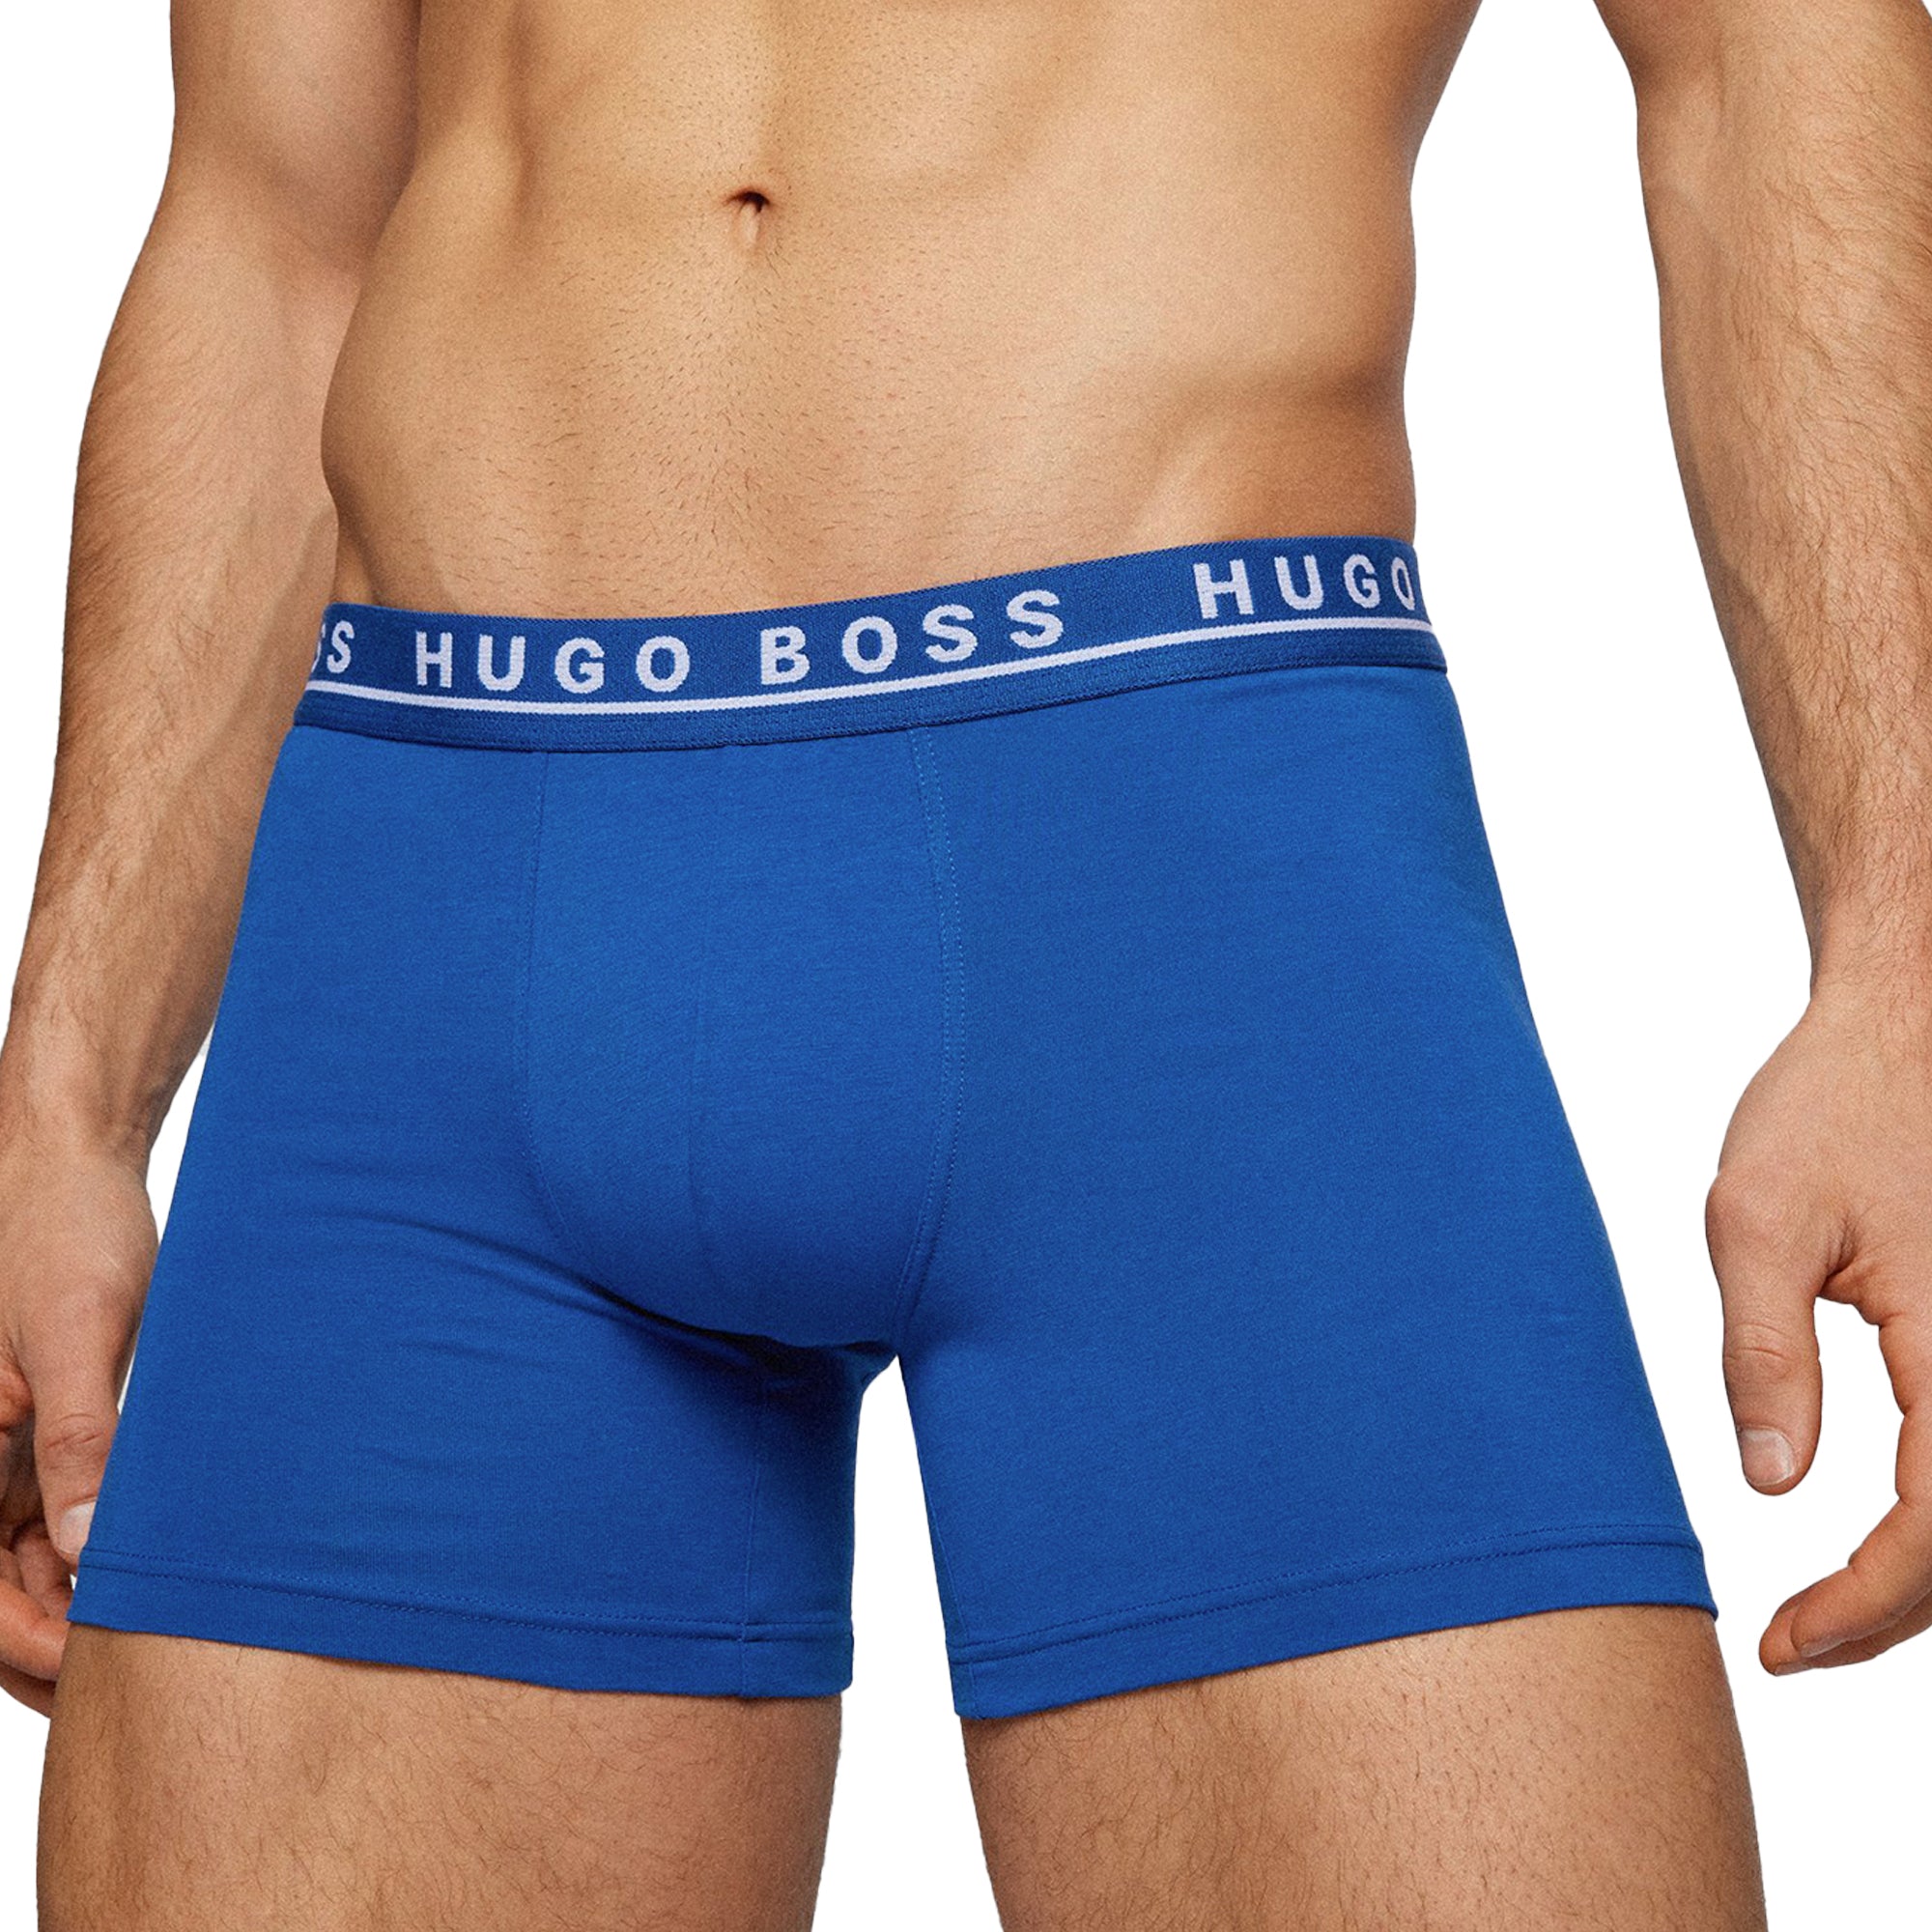 Boss 3 Pack Cotton Stretch Boxer Brief - Blue/Grey/Navy